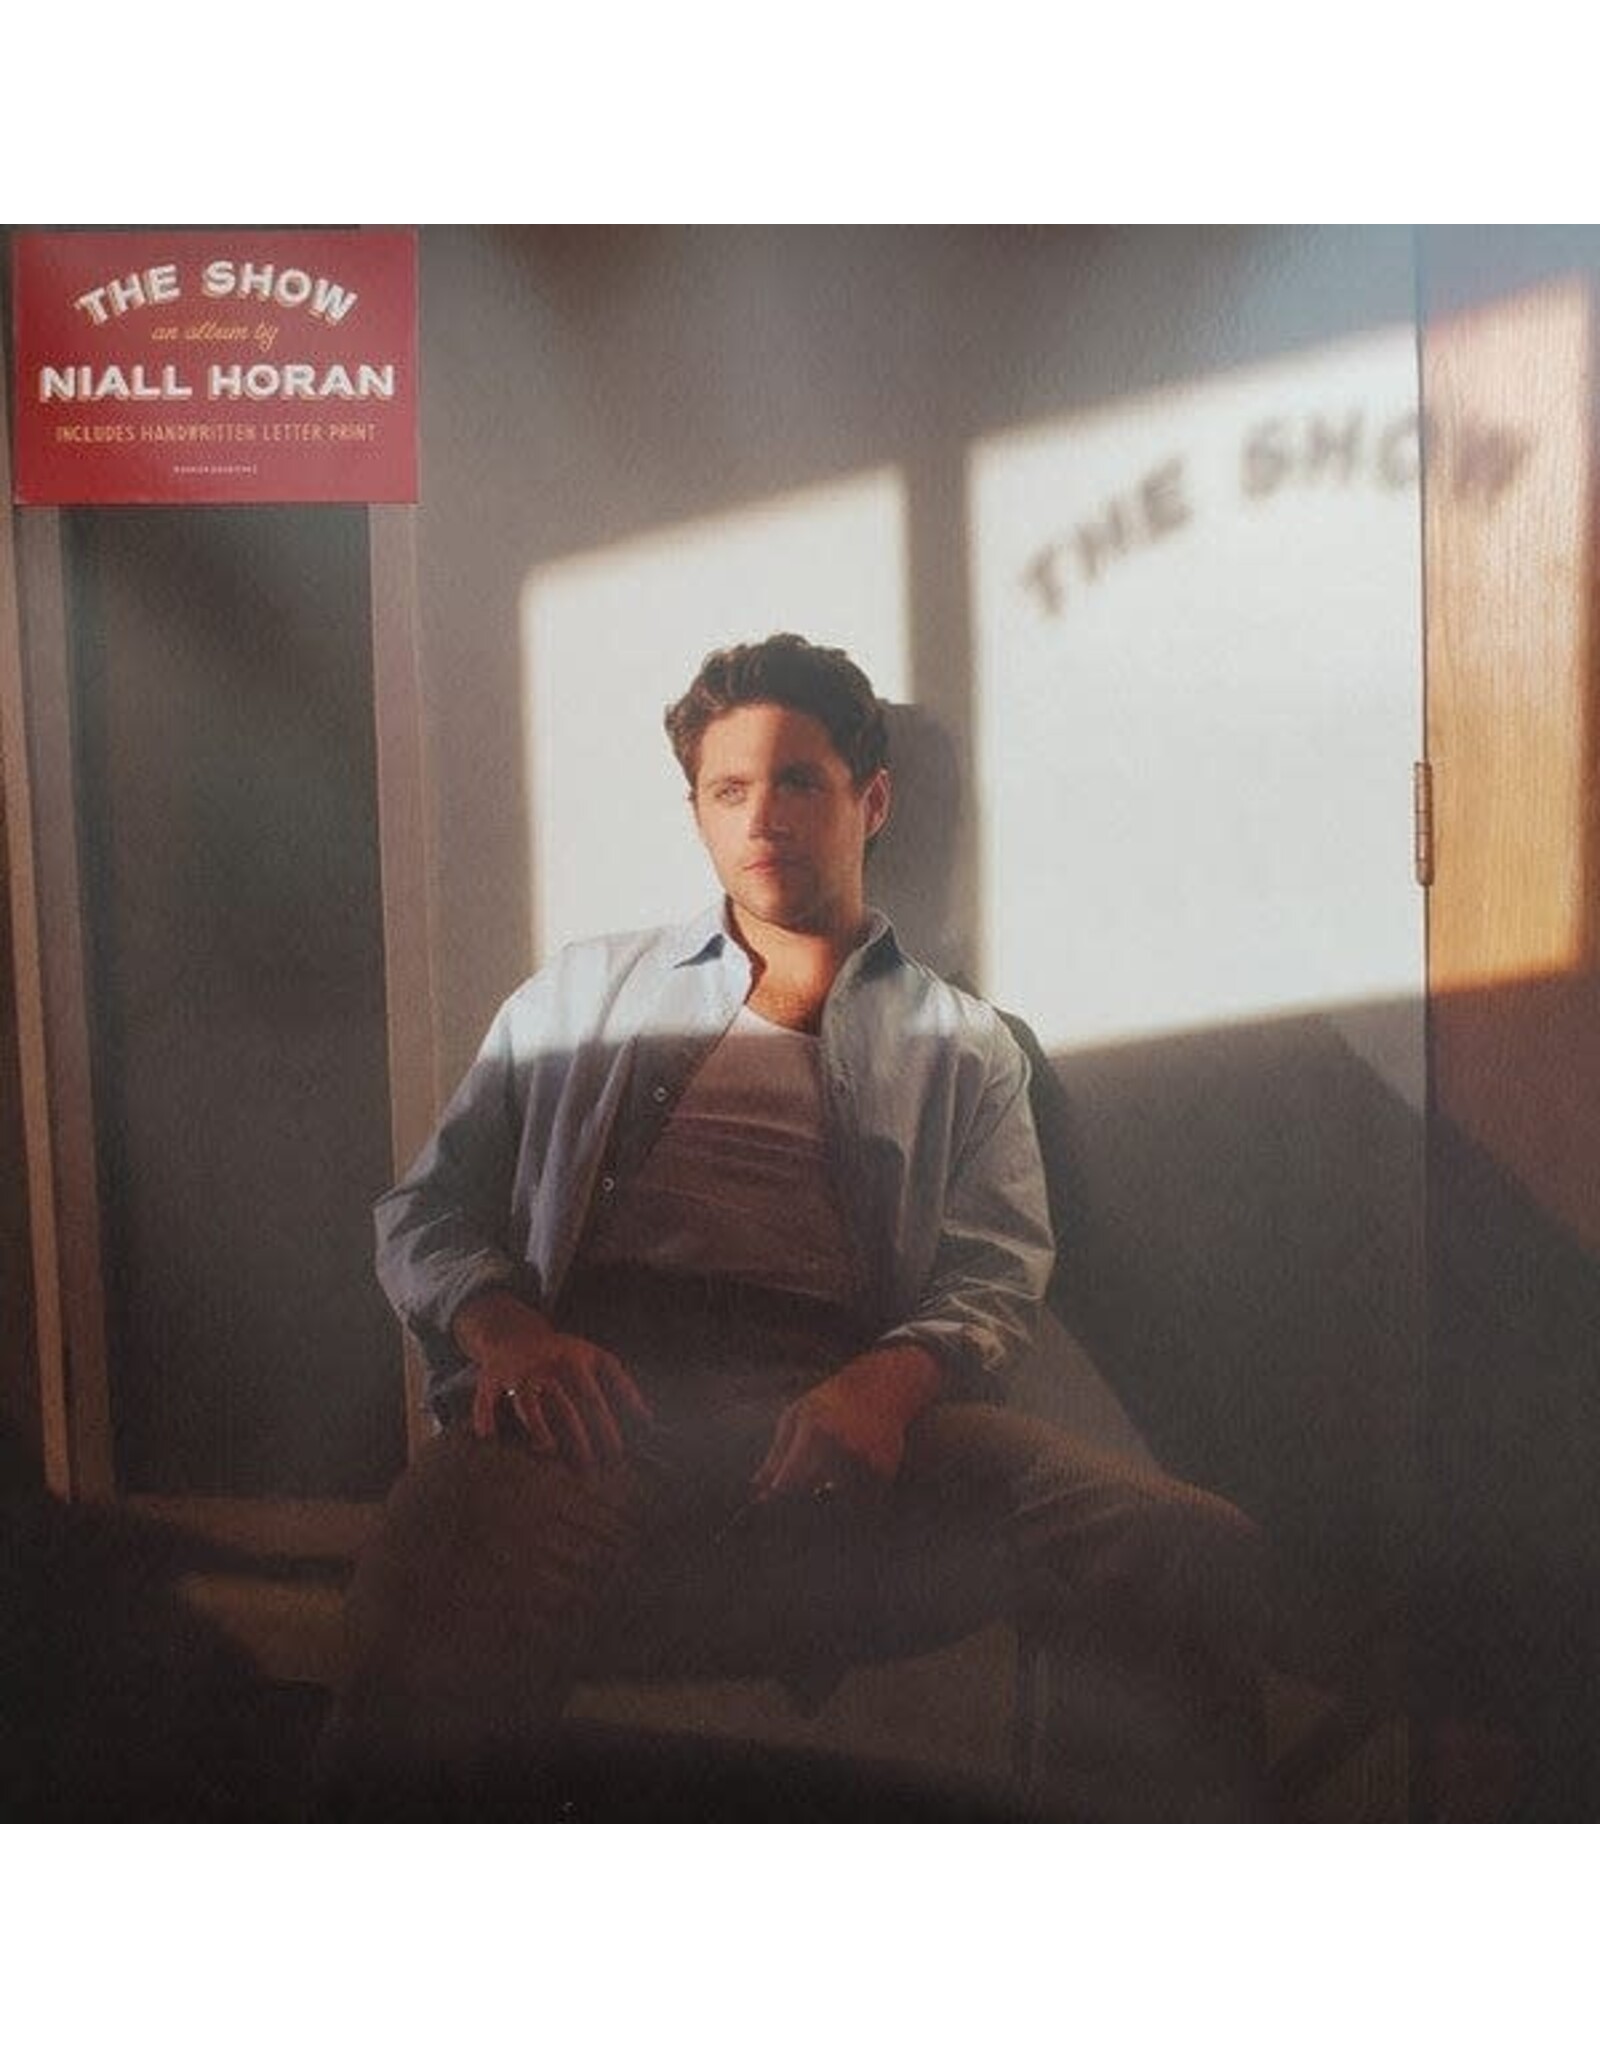 Niall Horan - The Show (Exclusive Blue Vinyl)